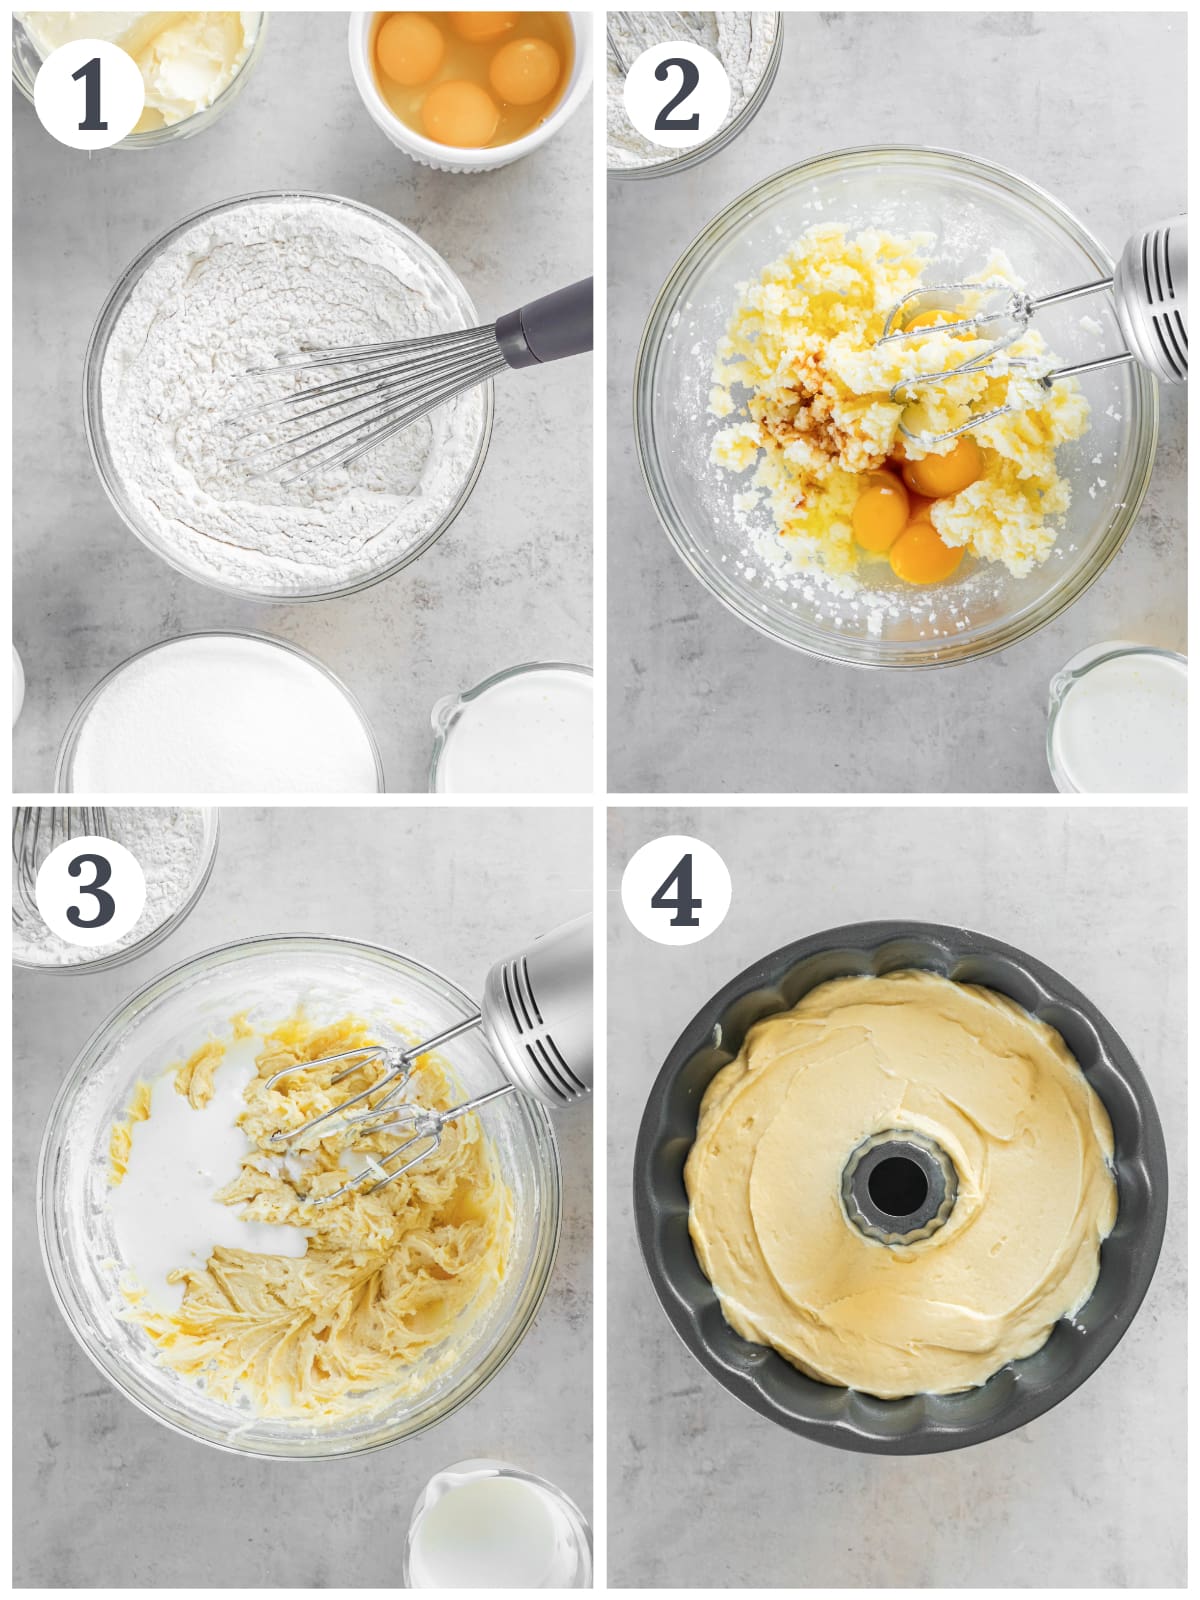 photo collage demonstrating how to make kentucky butter cake in a mixing bowl and bundt pan.